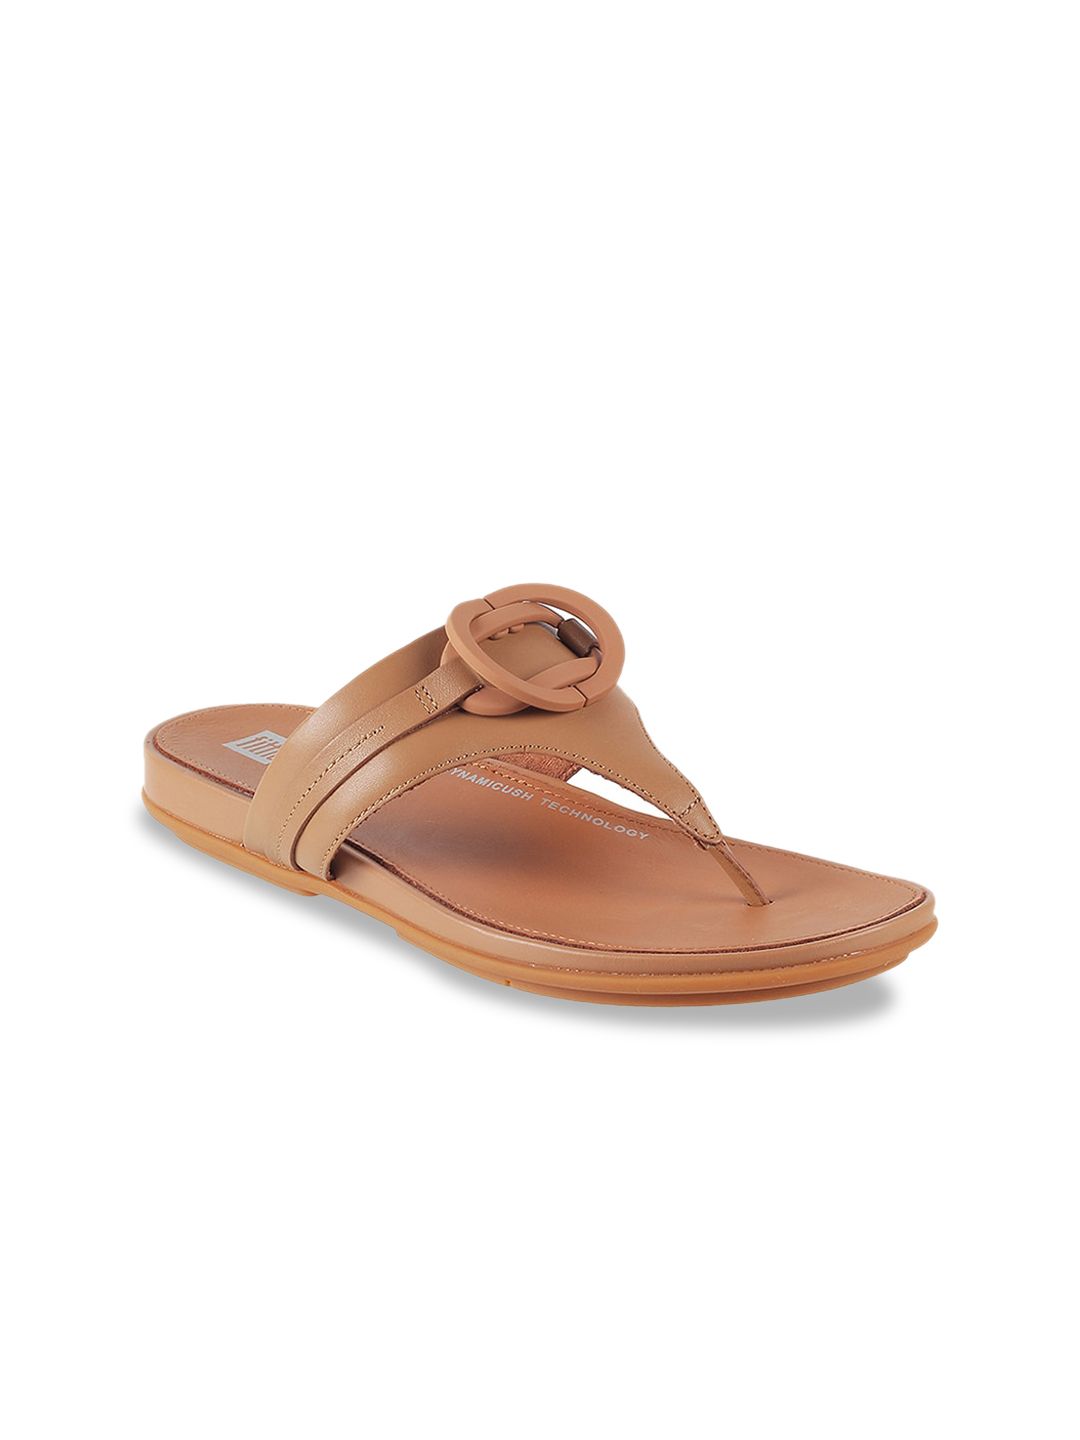 fitflop Buckle Detail Leather Open Toe Flats Price in India